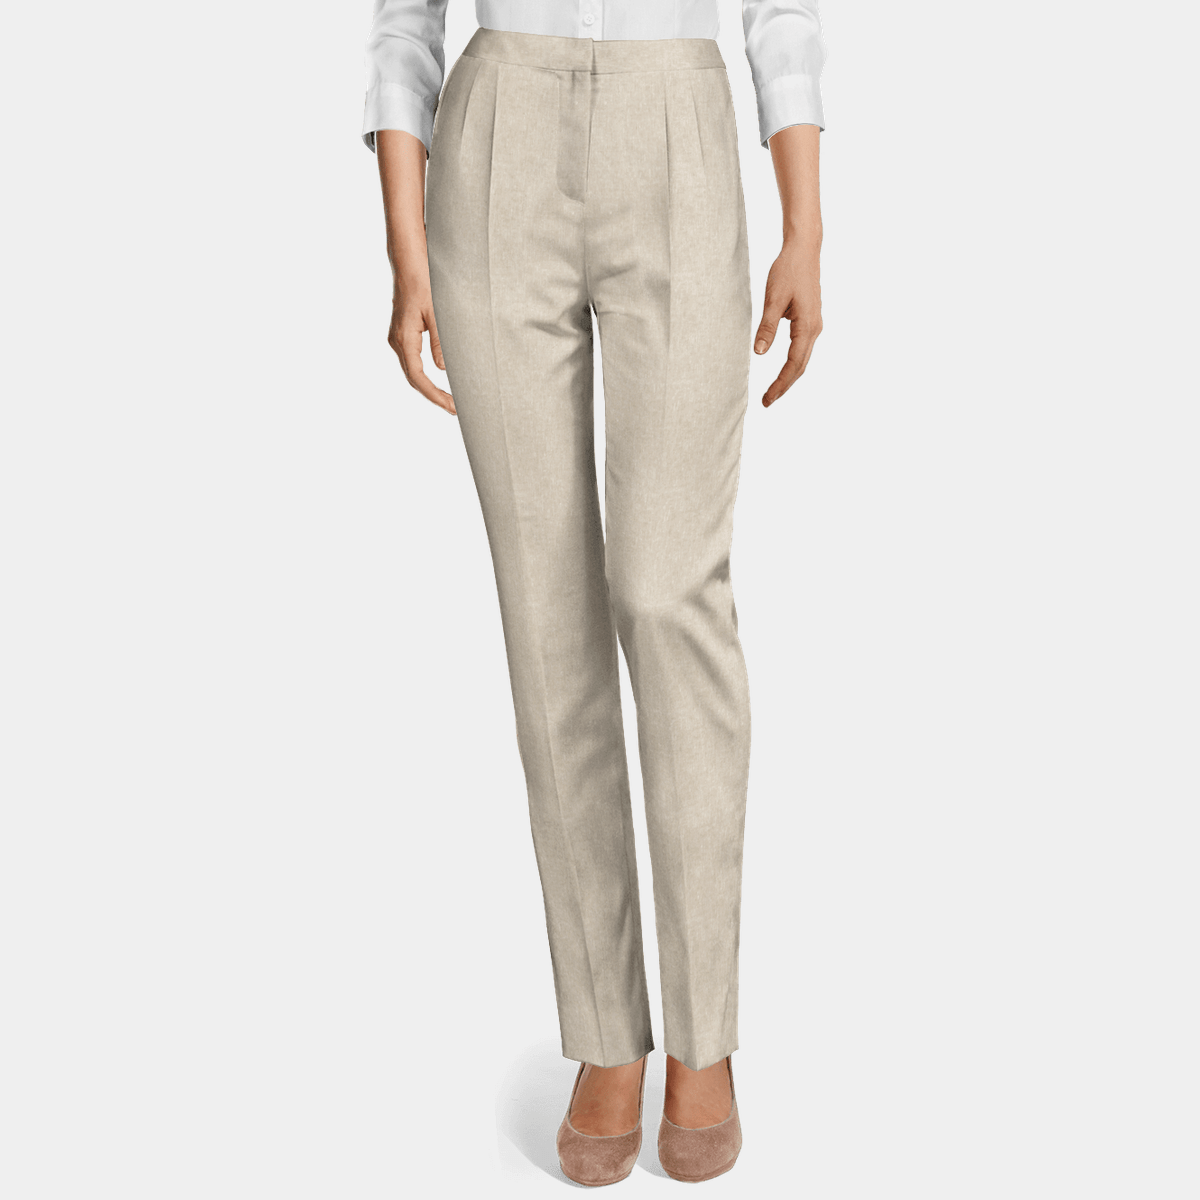 Fitted womens trousers - beige